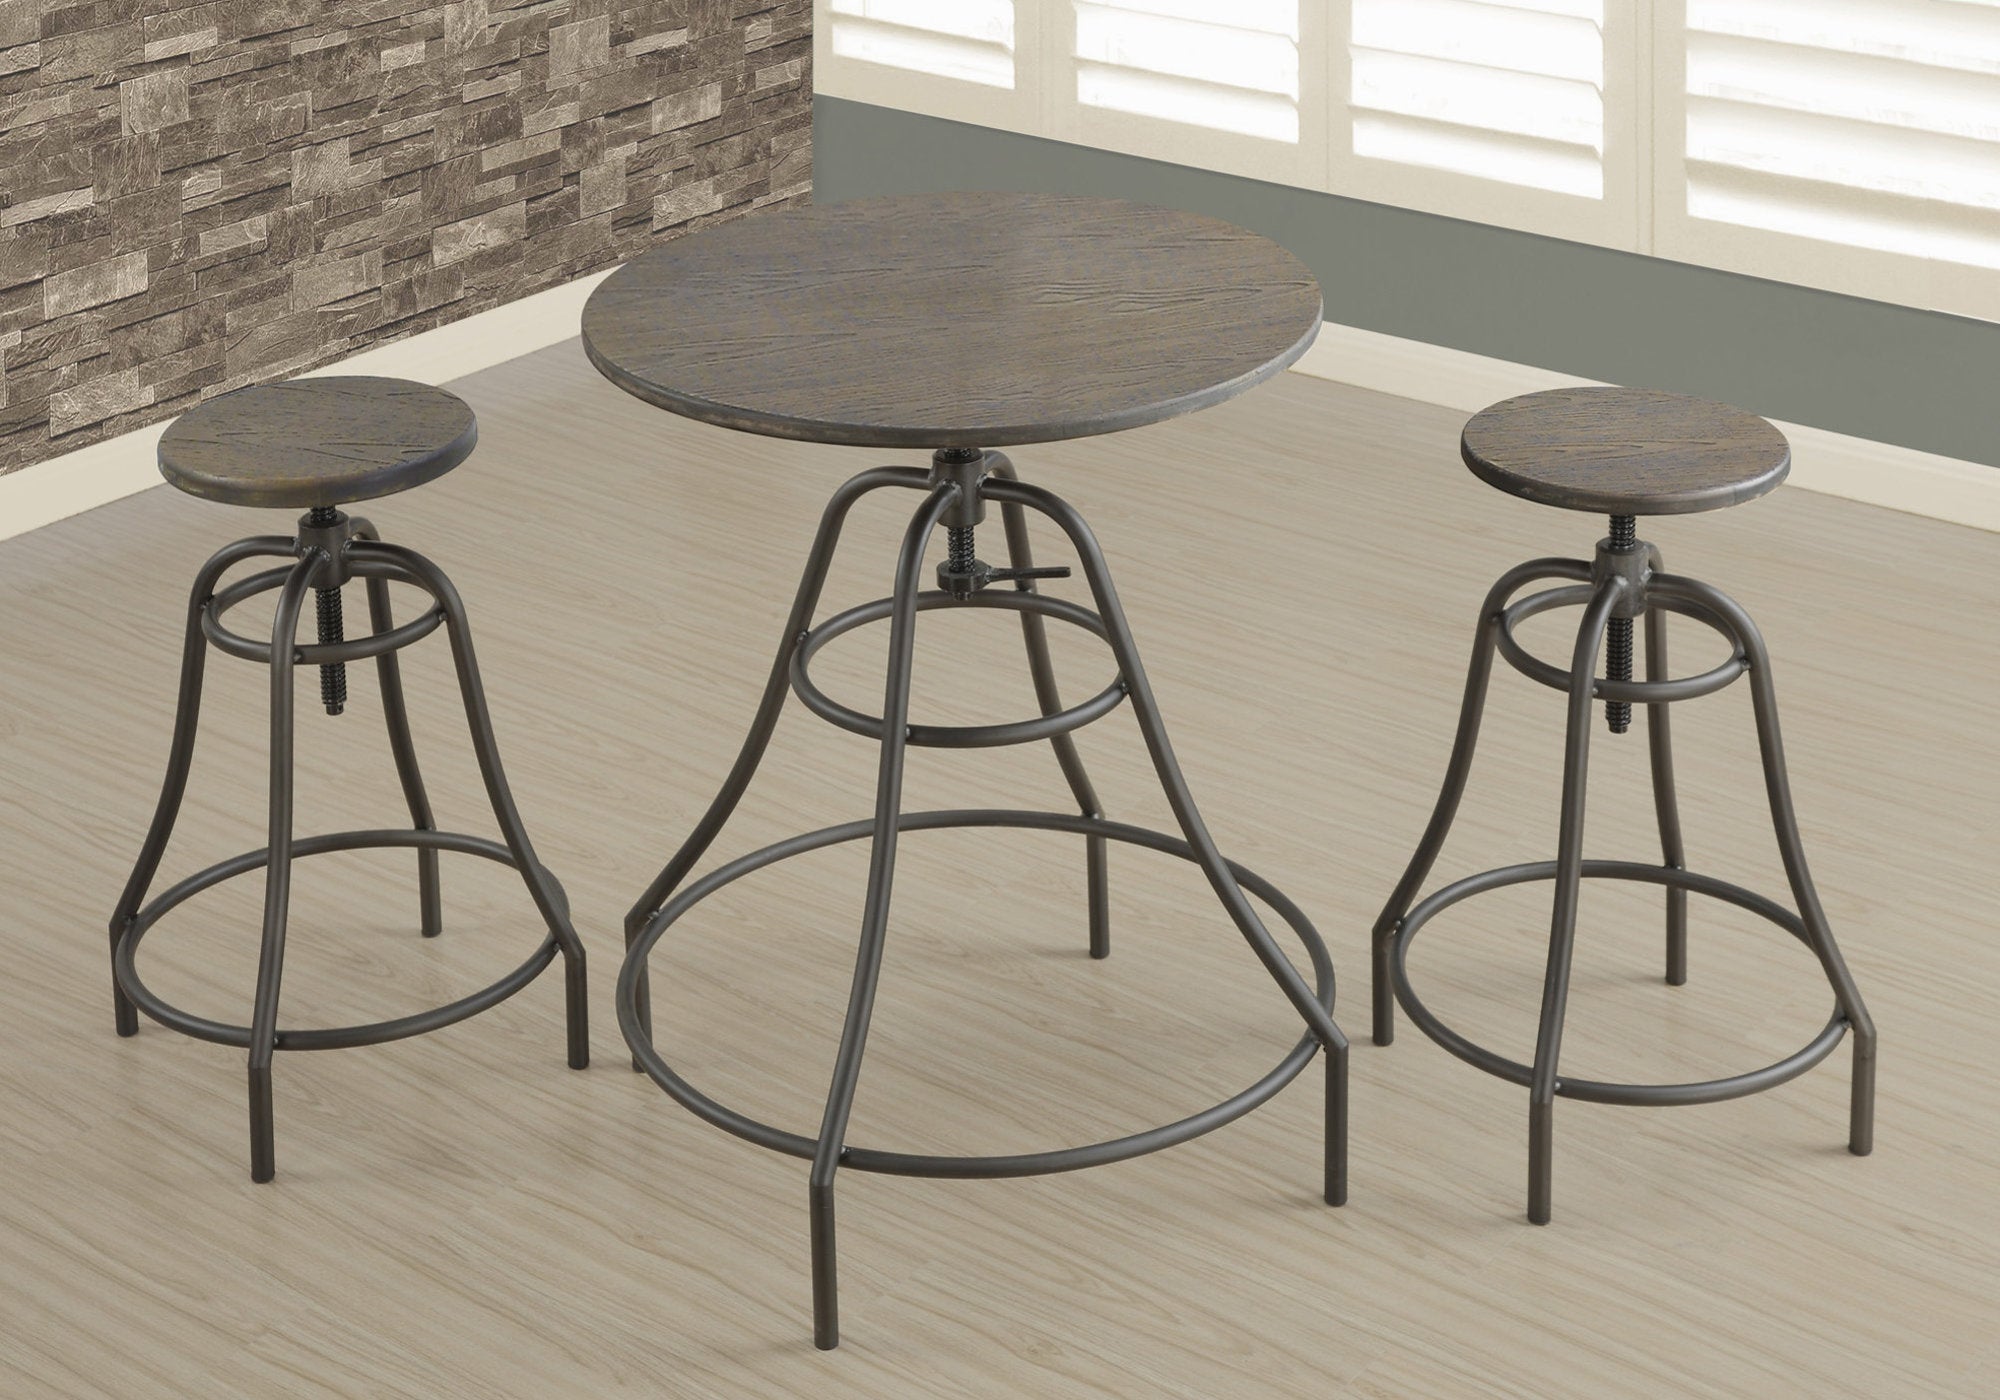 MN-421085    Dining Table Set, 3Pcs Set, Metal, Small, 28" Round, Pub Height, Kitchen, Metal, Laminate, Brown, Industrial, Rustic